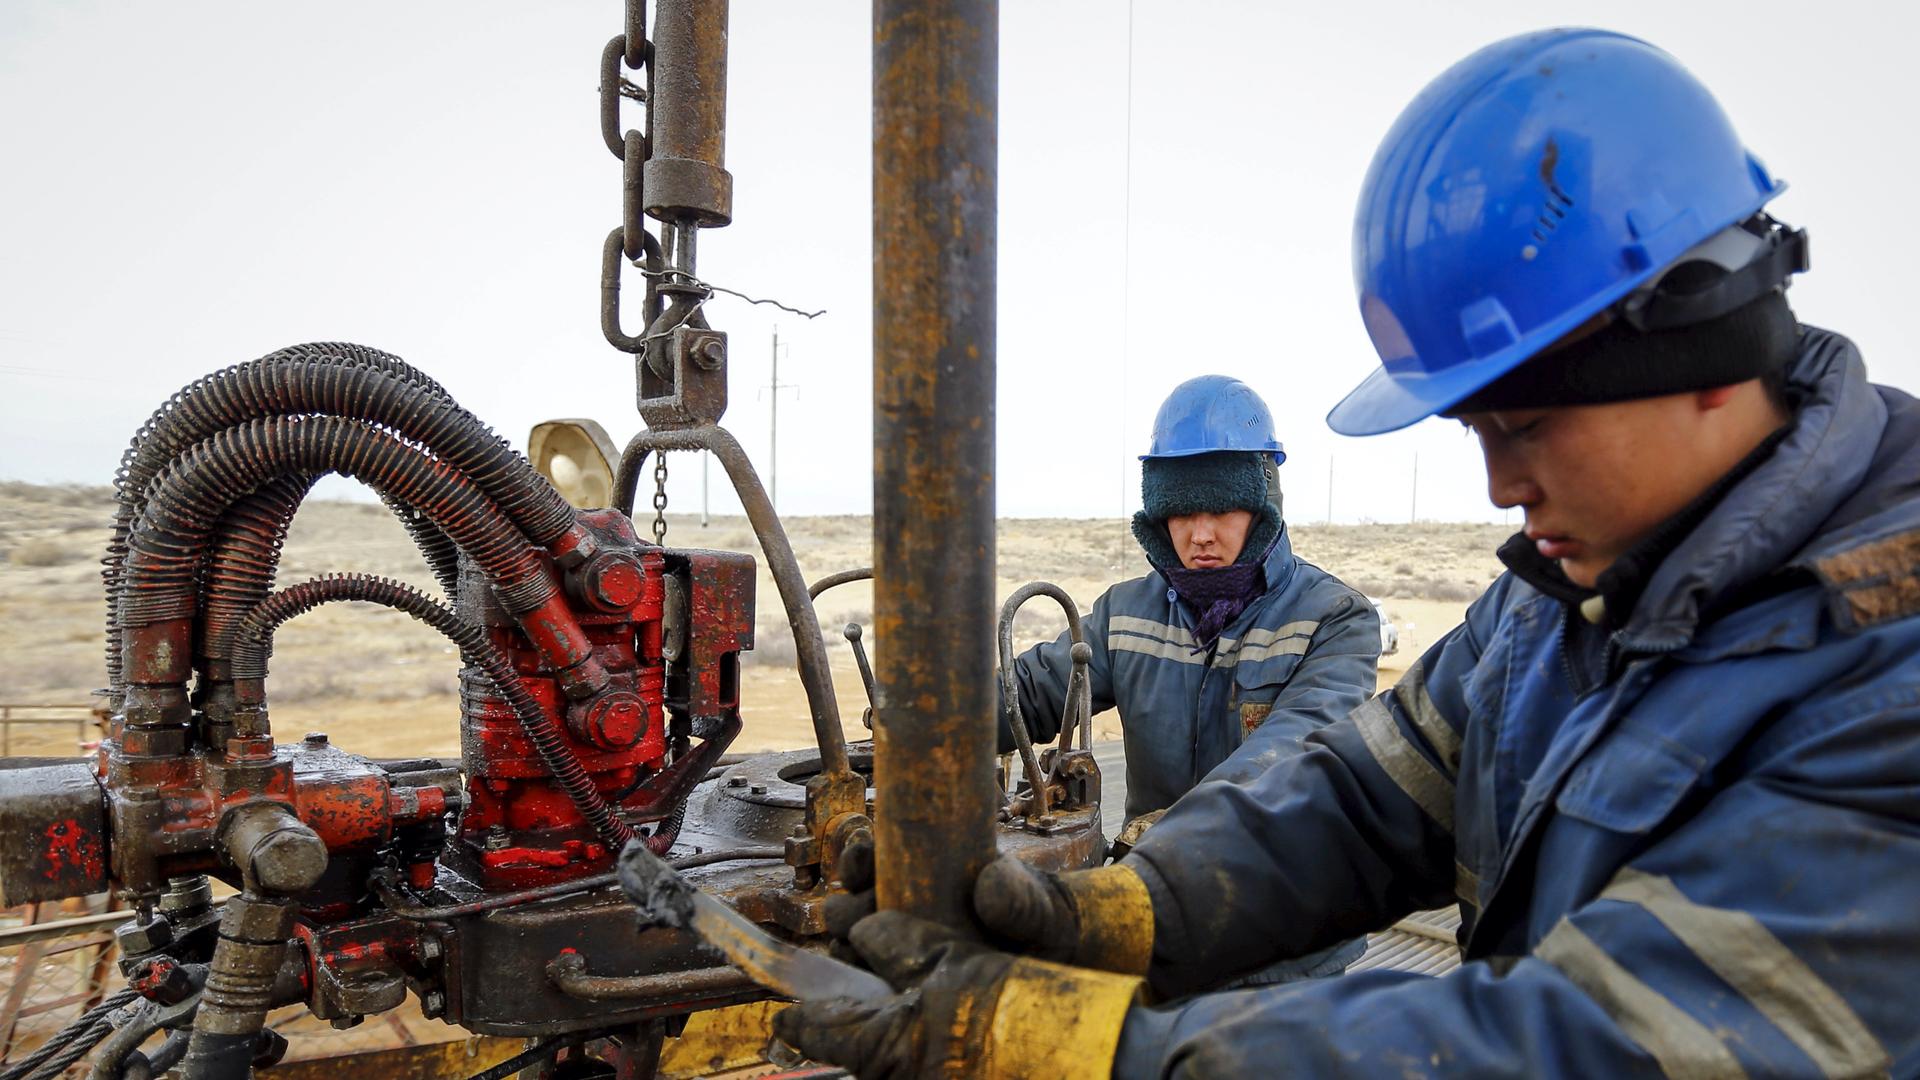 Two people wearing uniforms and blue helmets carry out maintenance at an oil well